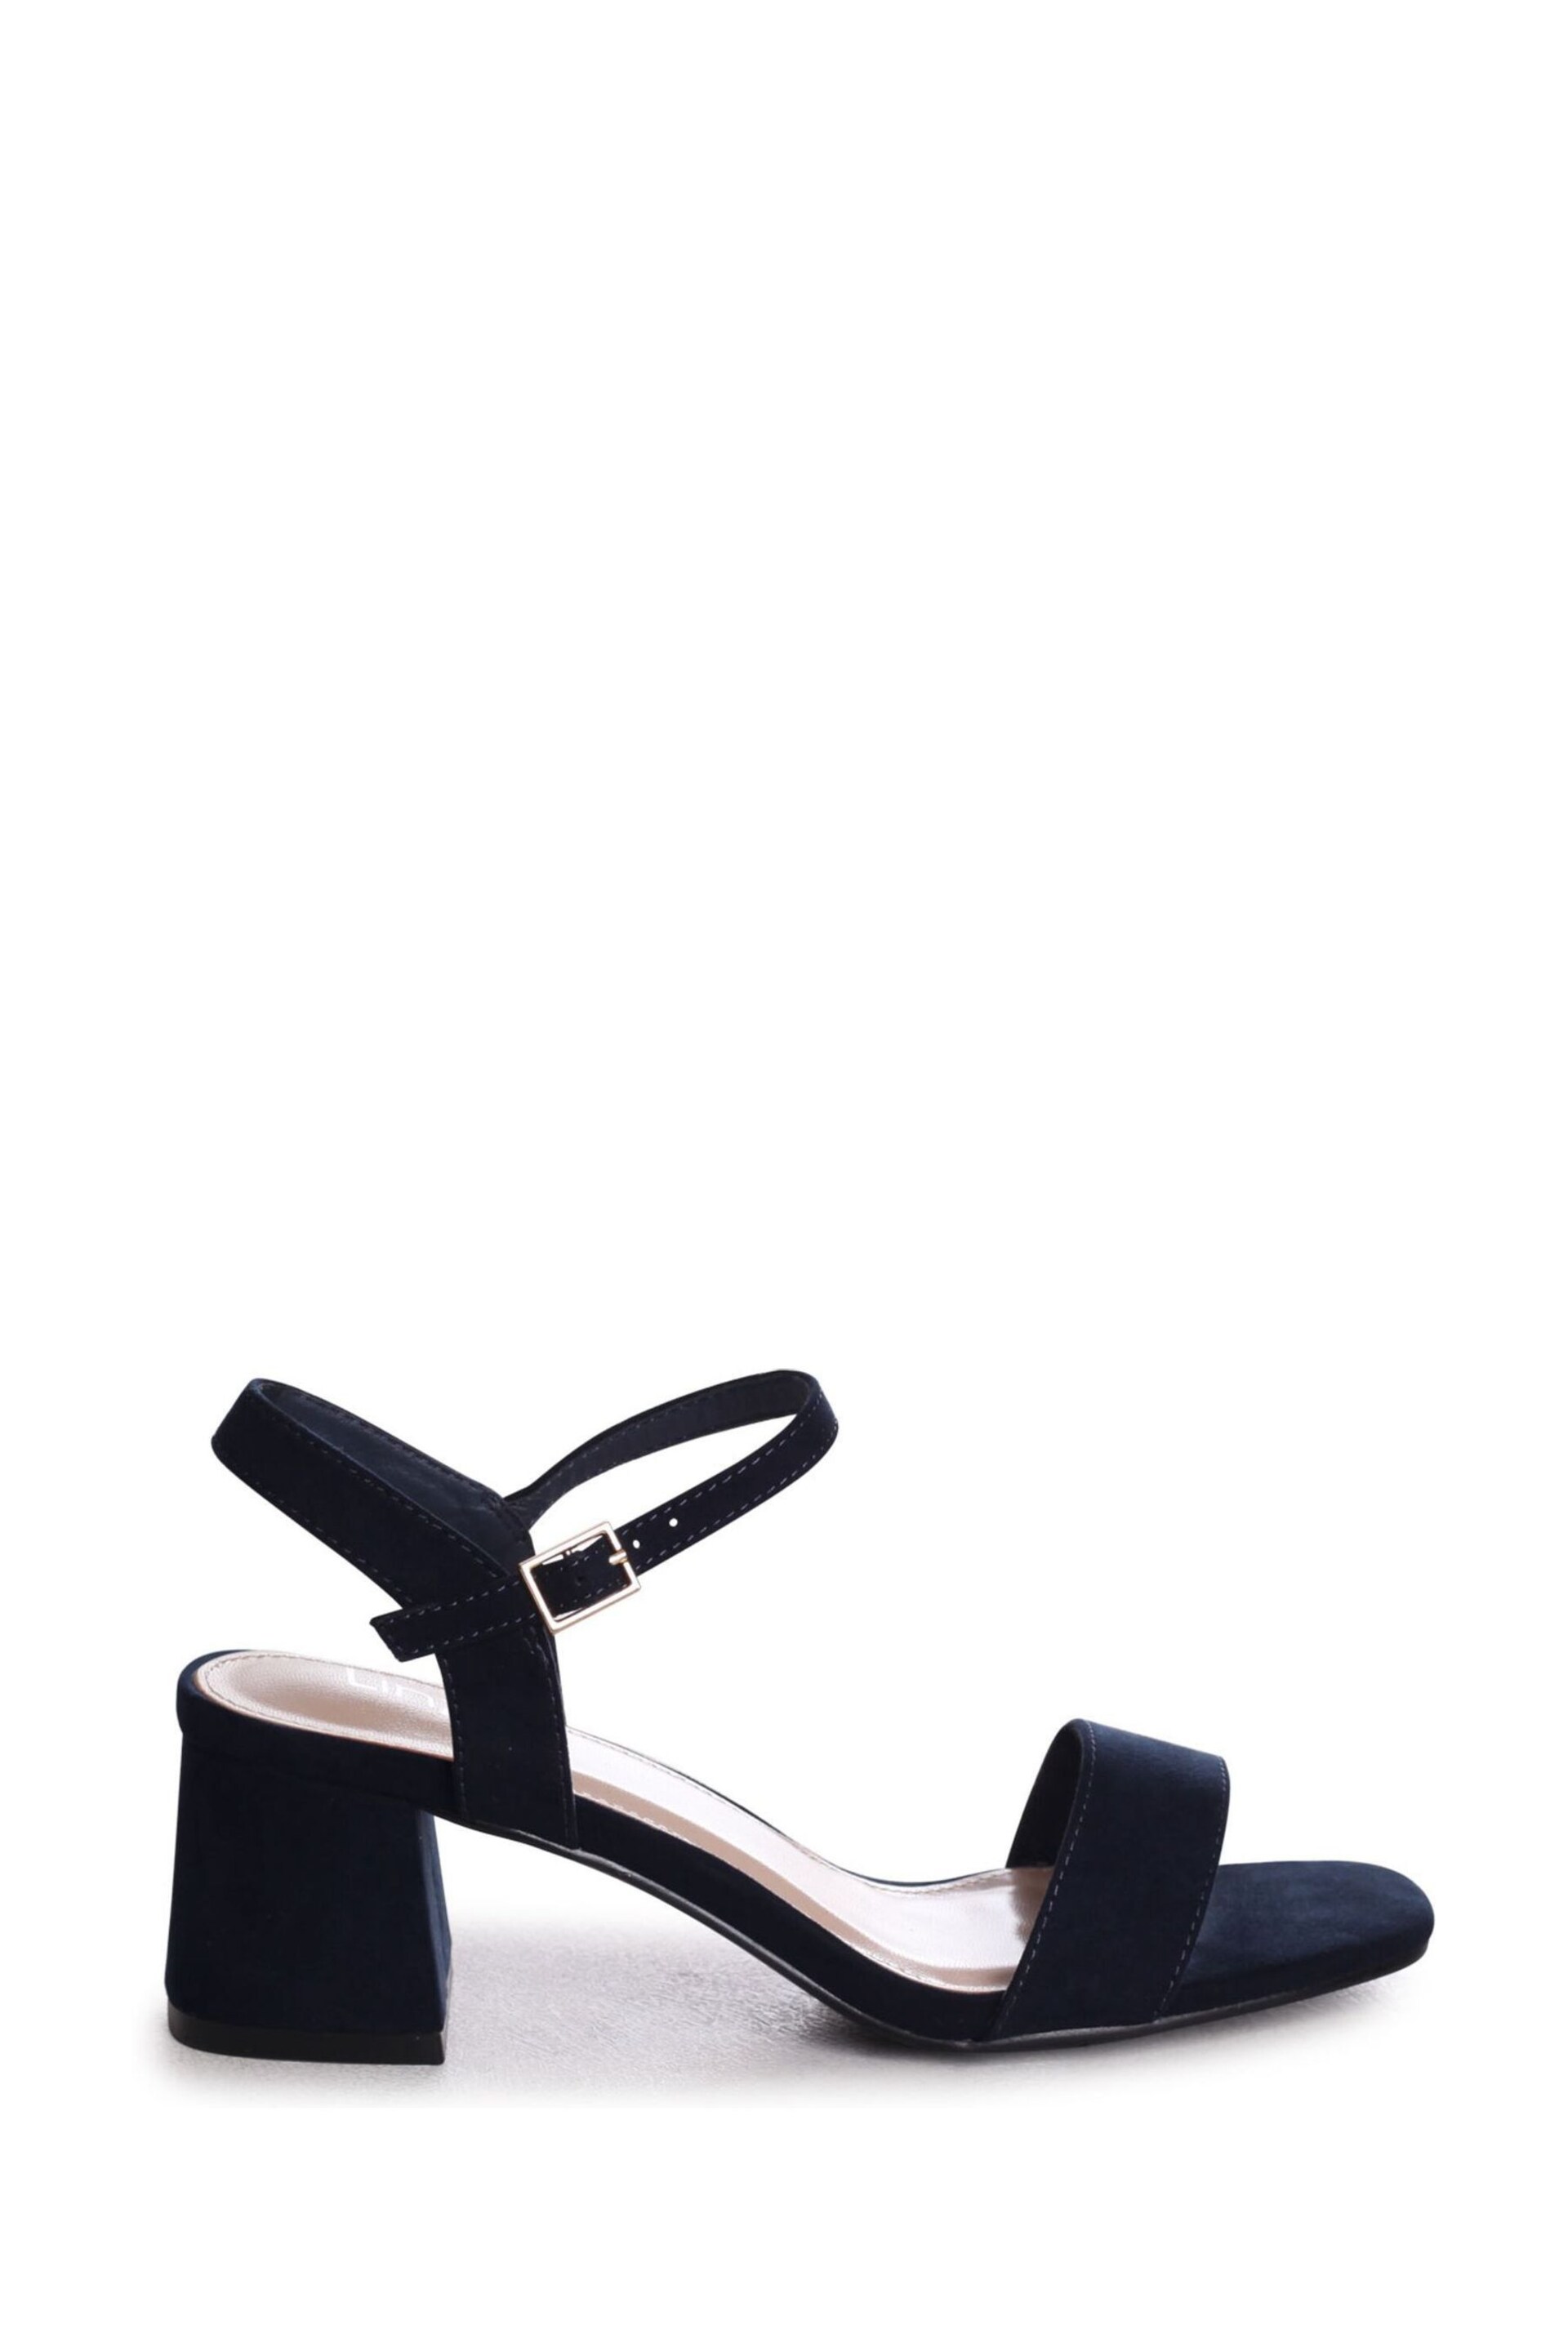 Linzi Blue Darcie Barely There Block Heeled Sandals - Image 2 of 4